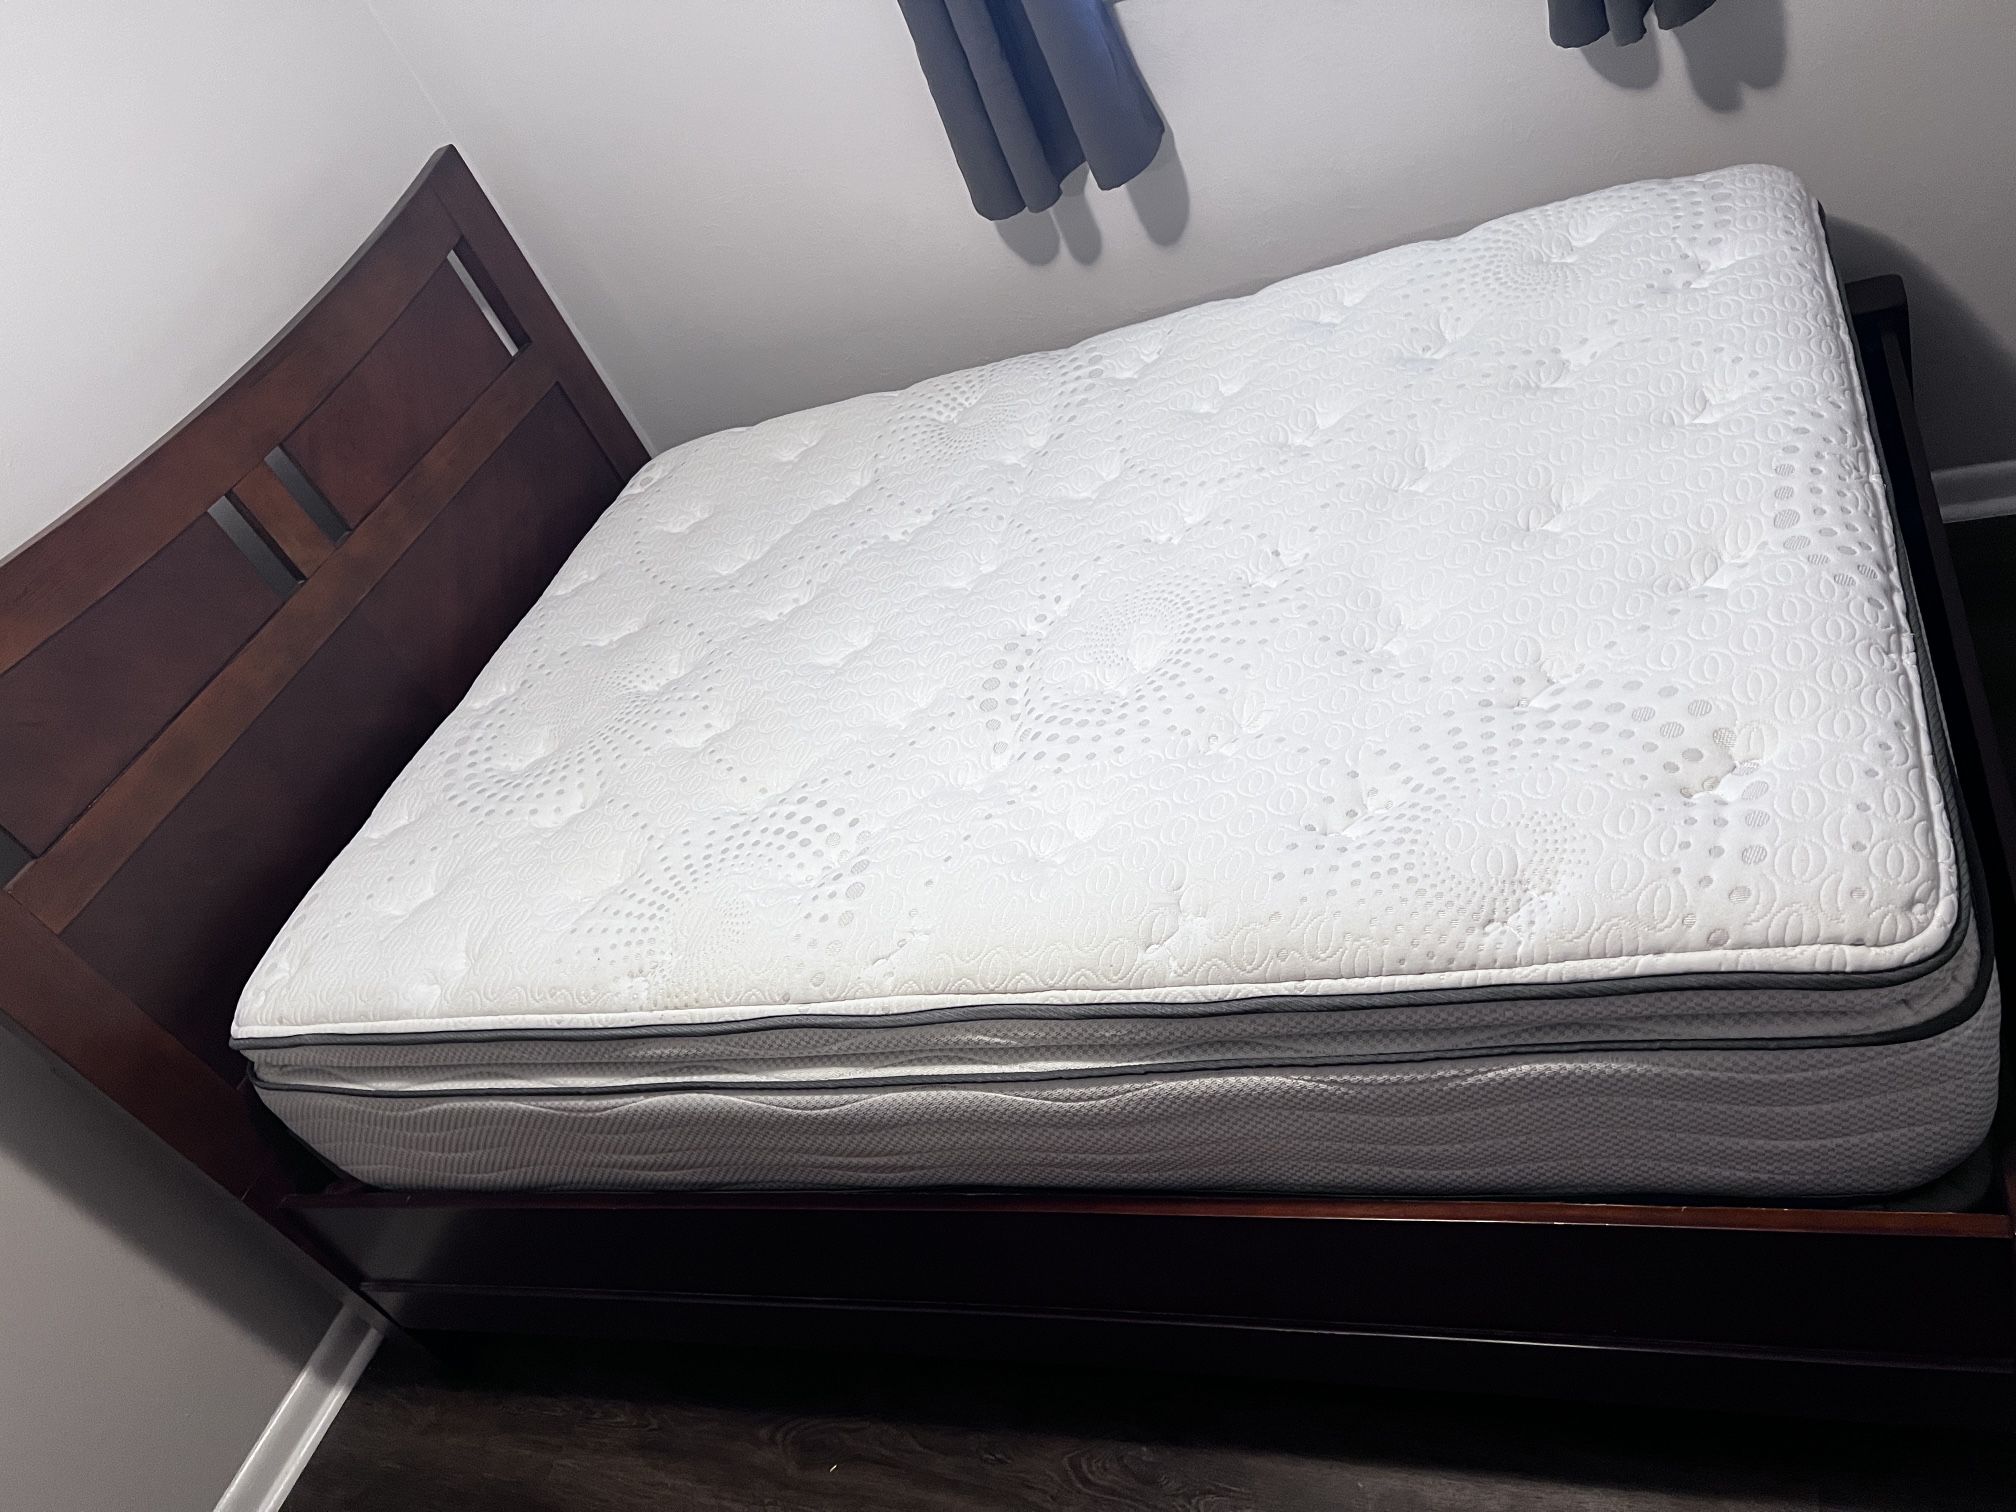 Full/double Bed Frame Headboard Box Spring And Pillow Top Mattress With Protection Pad Cover And 2 Sets Of Sheets